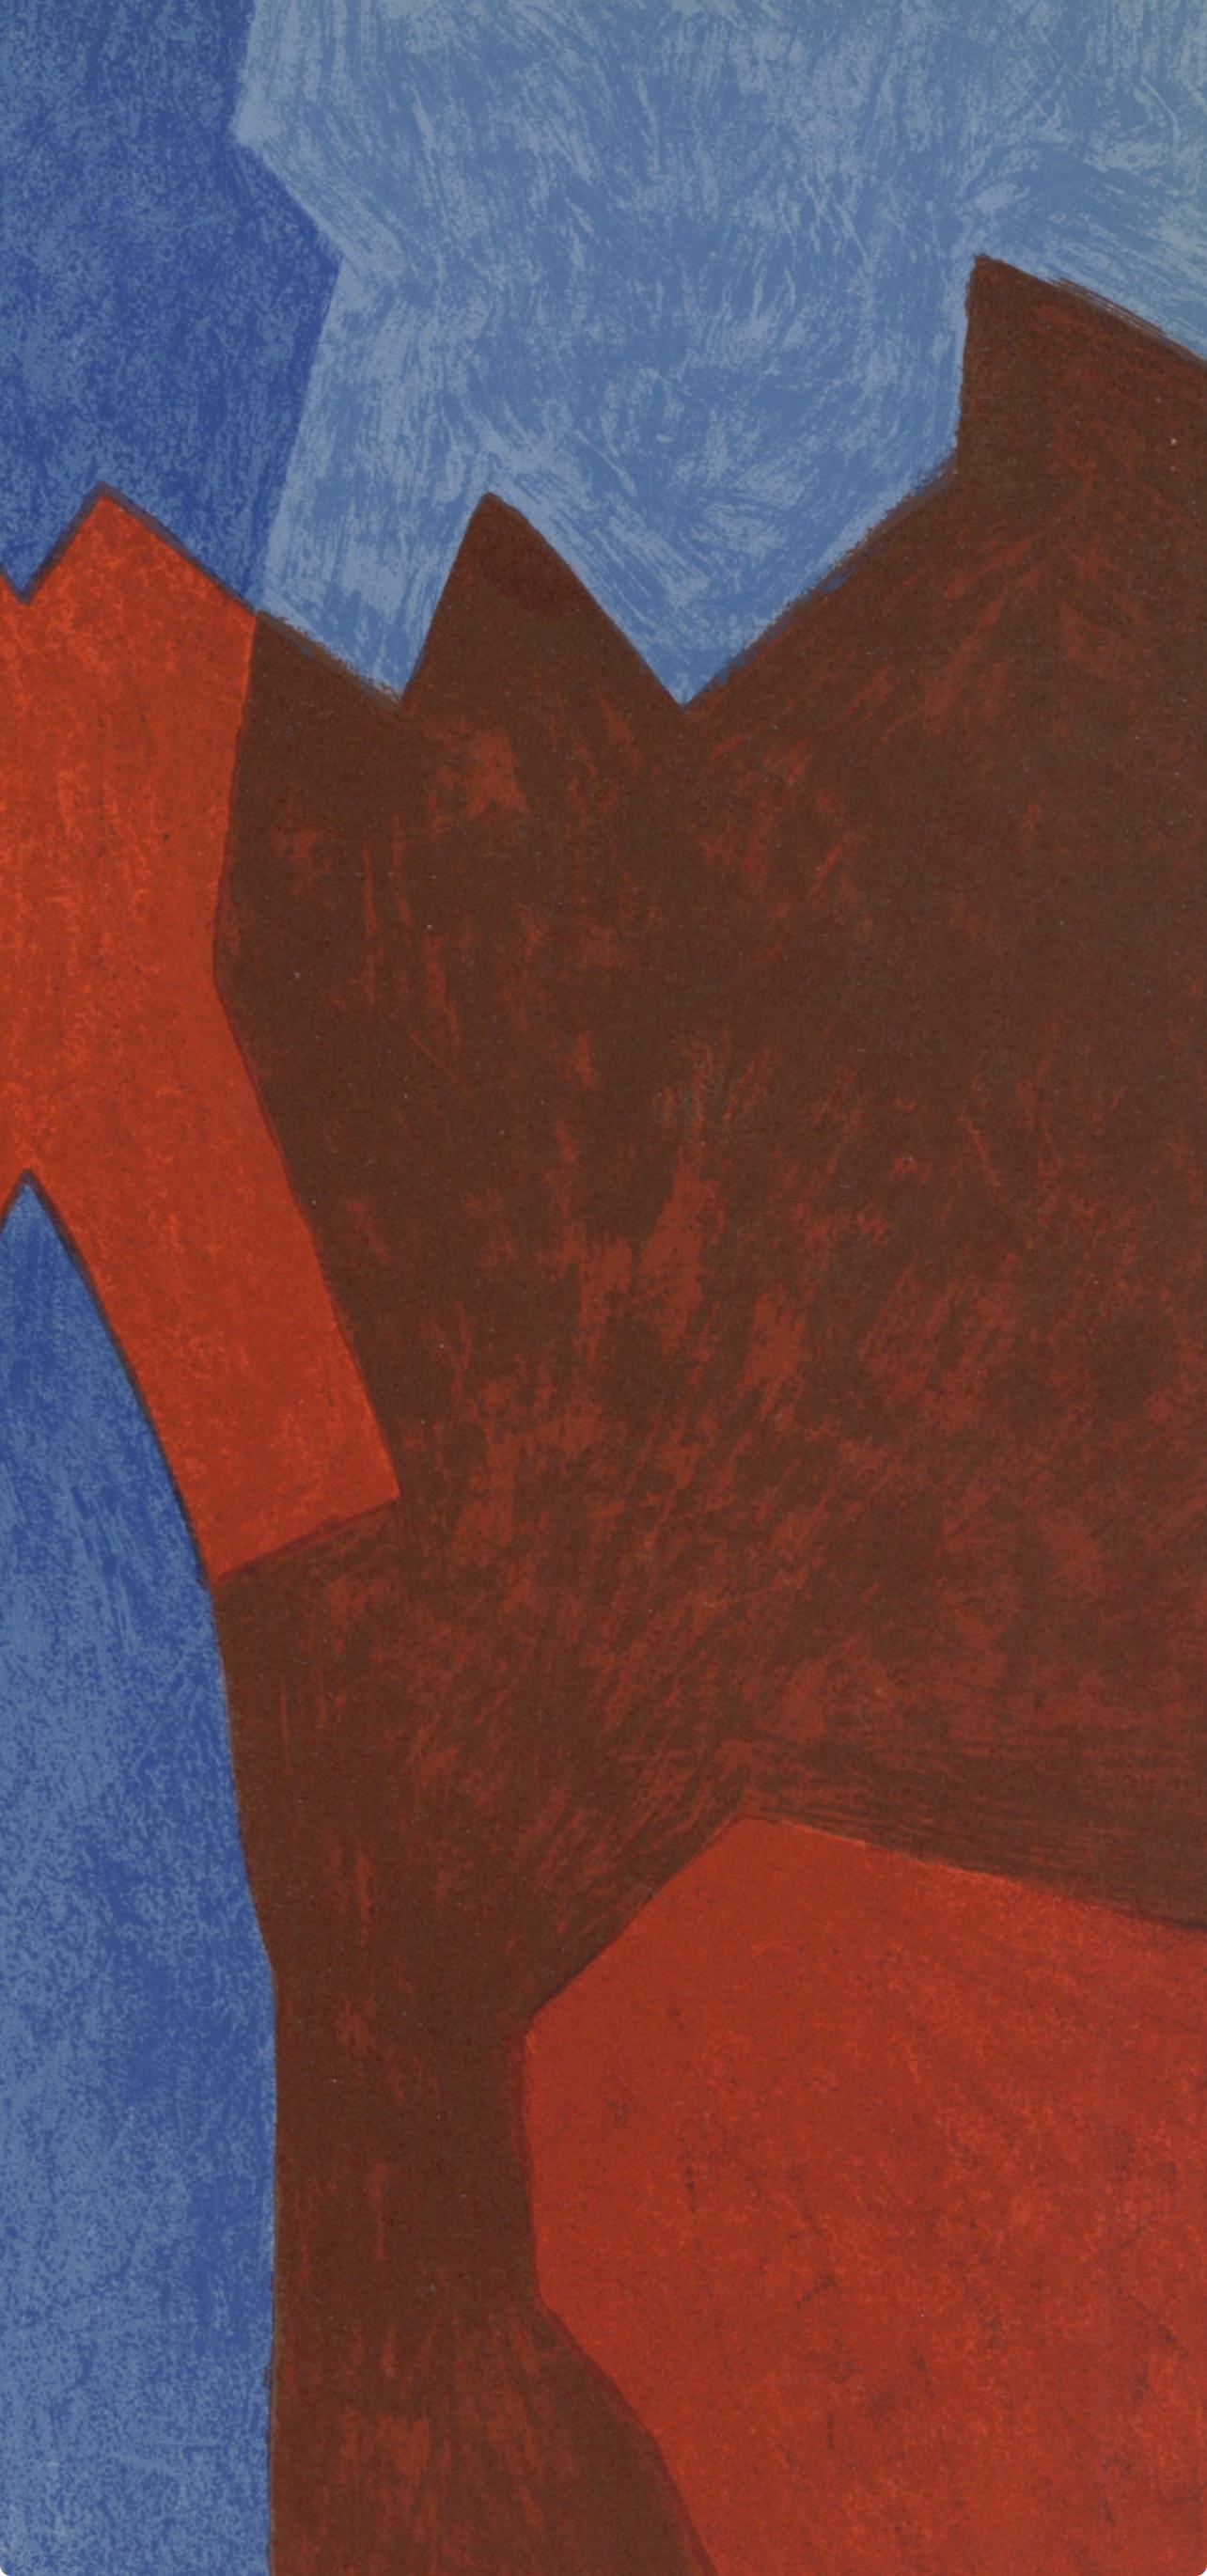 Poliakoff, Composition rouge/bleu (Poliakoff/Schneider 68), XXe Siècle (after) - Modern Print by Serge Poliakoff